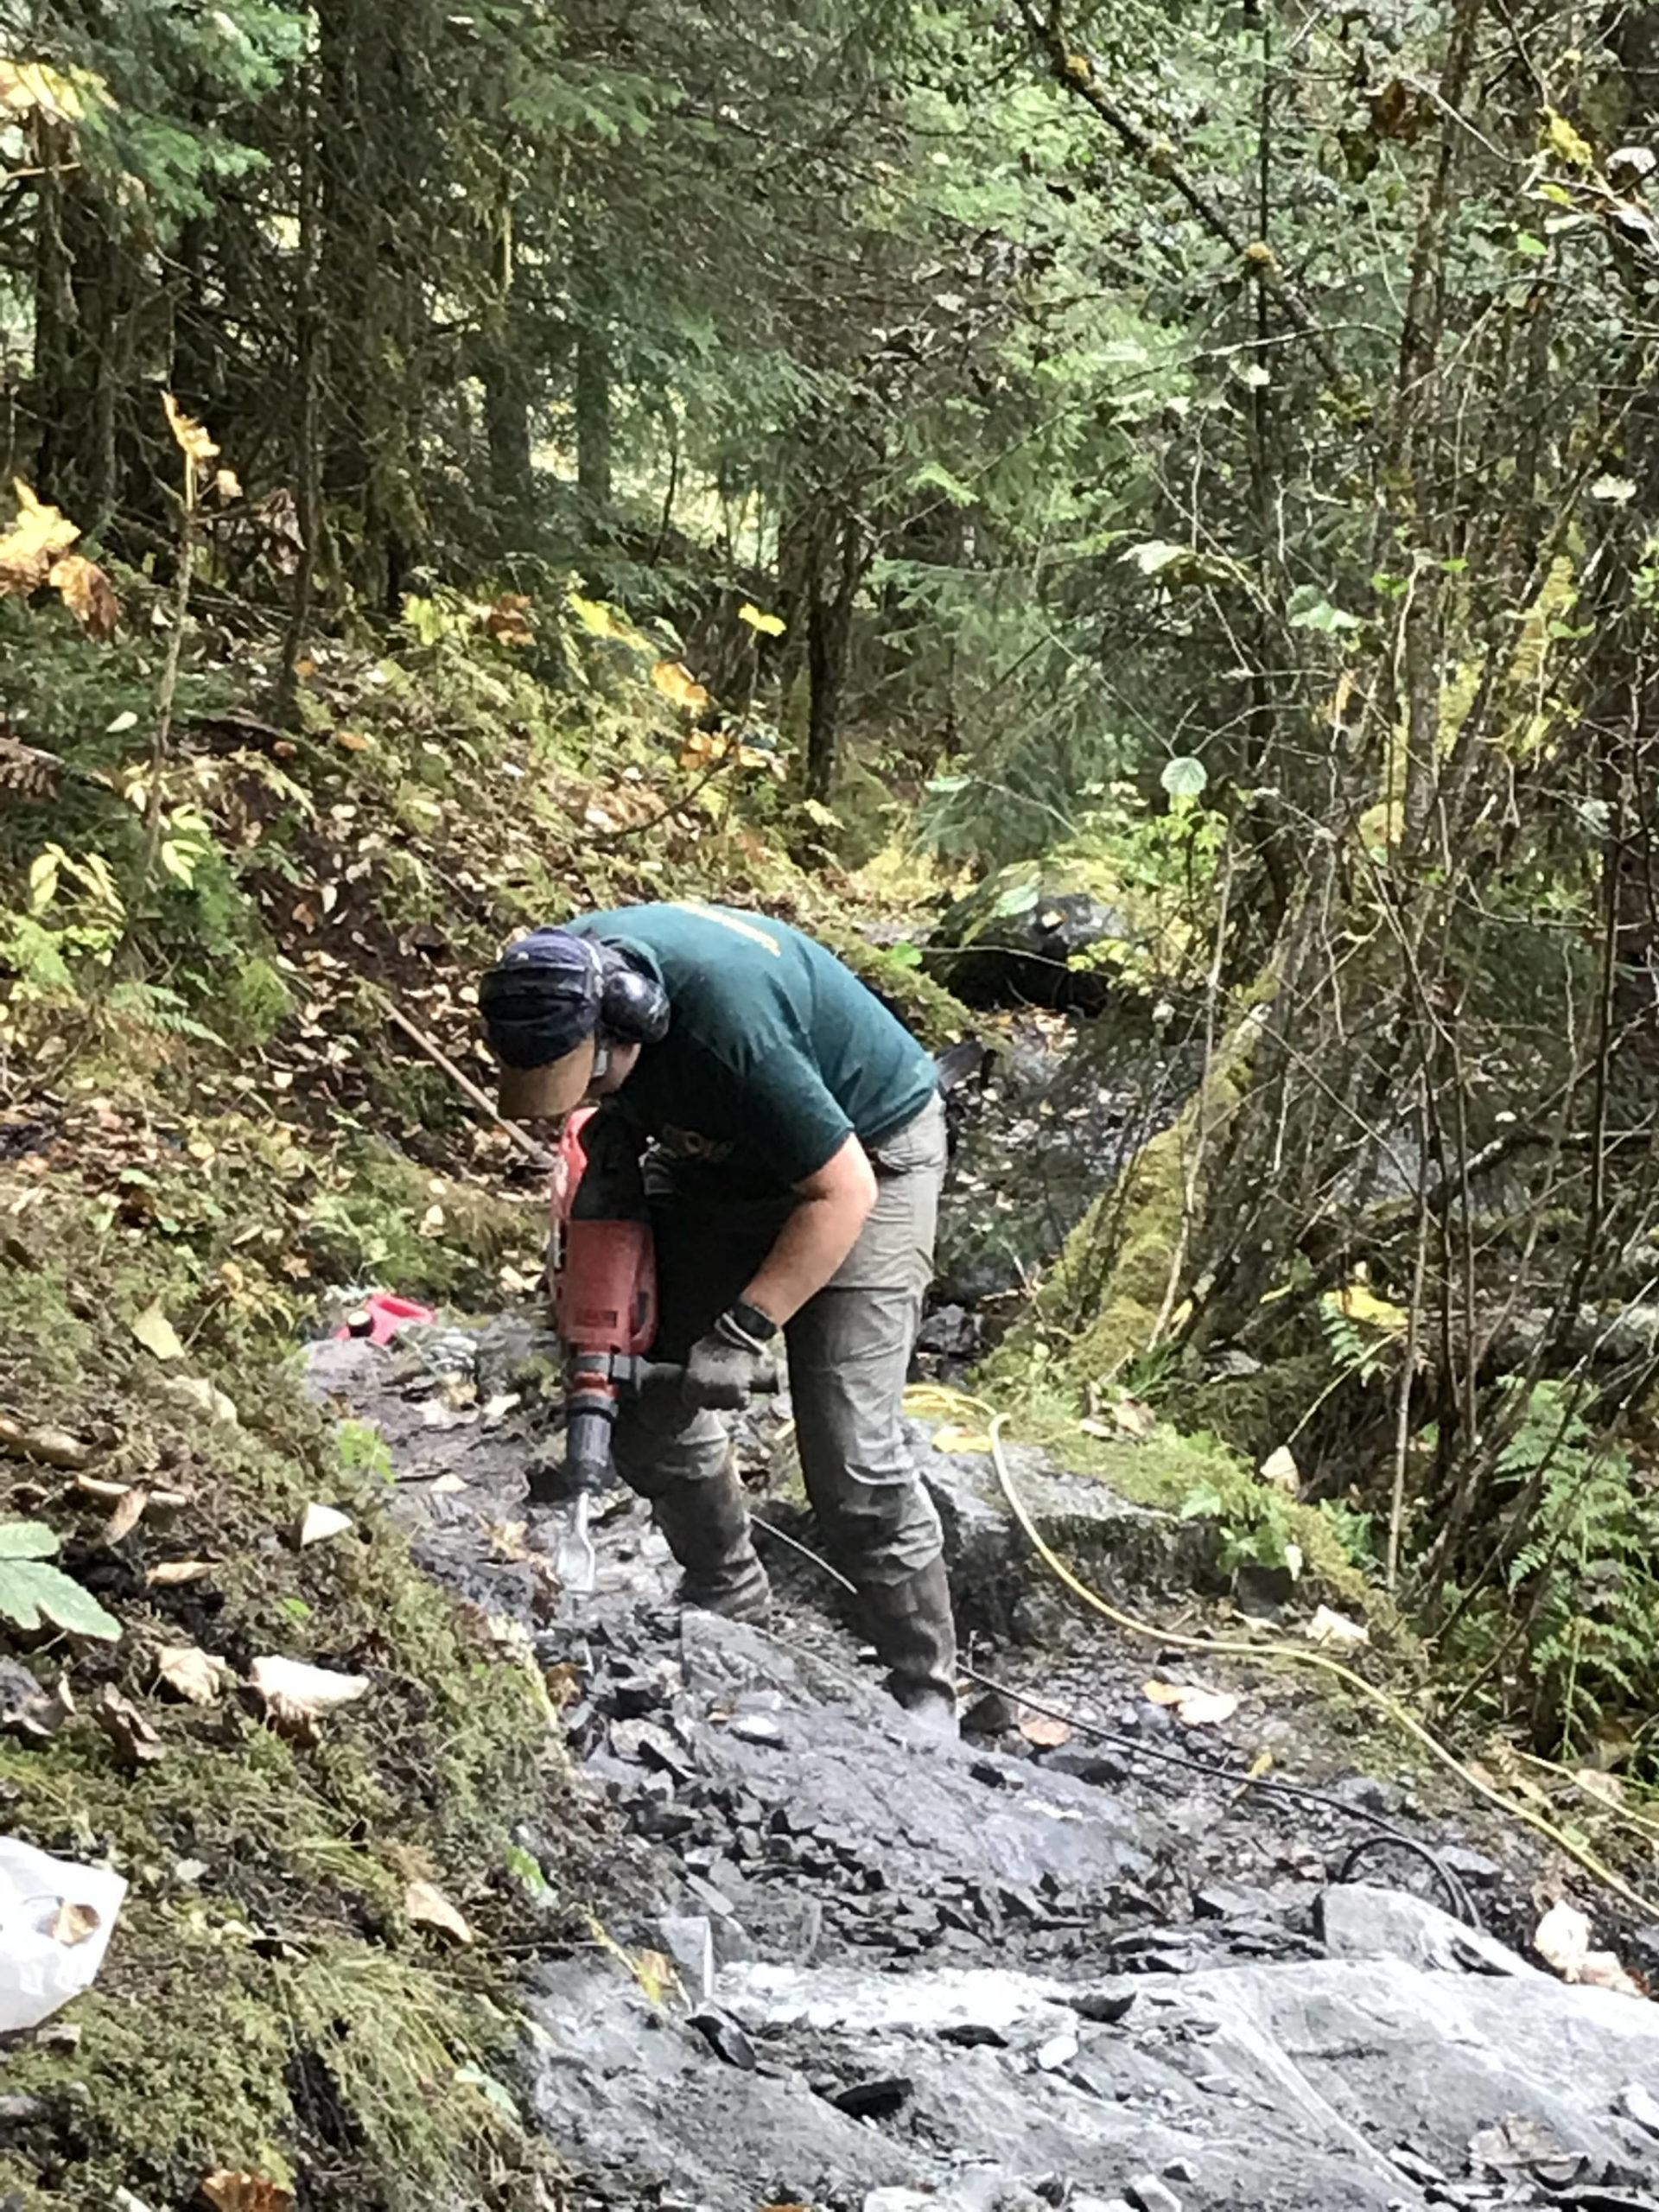 Destiny Locke, a member of the Forest Service’s trail crew, makes improvements to East Glacier Trail on Thursday, Sept. 24. “I hike East GT weekly and am so grateful for the new steps cut into rock that make climbing easier for short legs,” writes Laurie Craig. (Courtesy Photo / Laurie Craig)